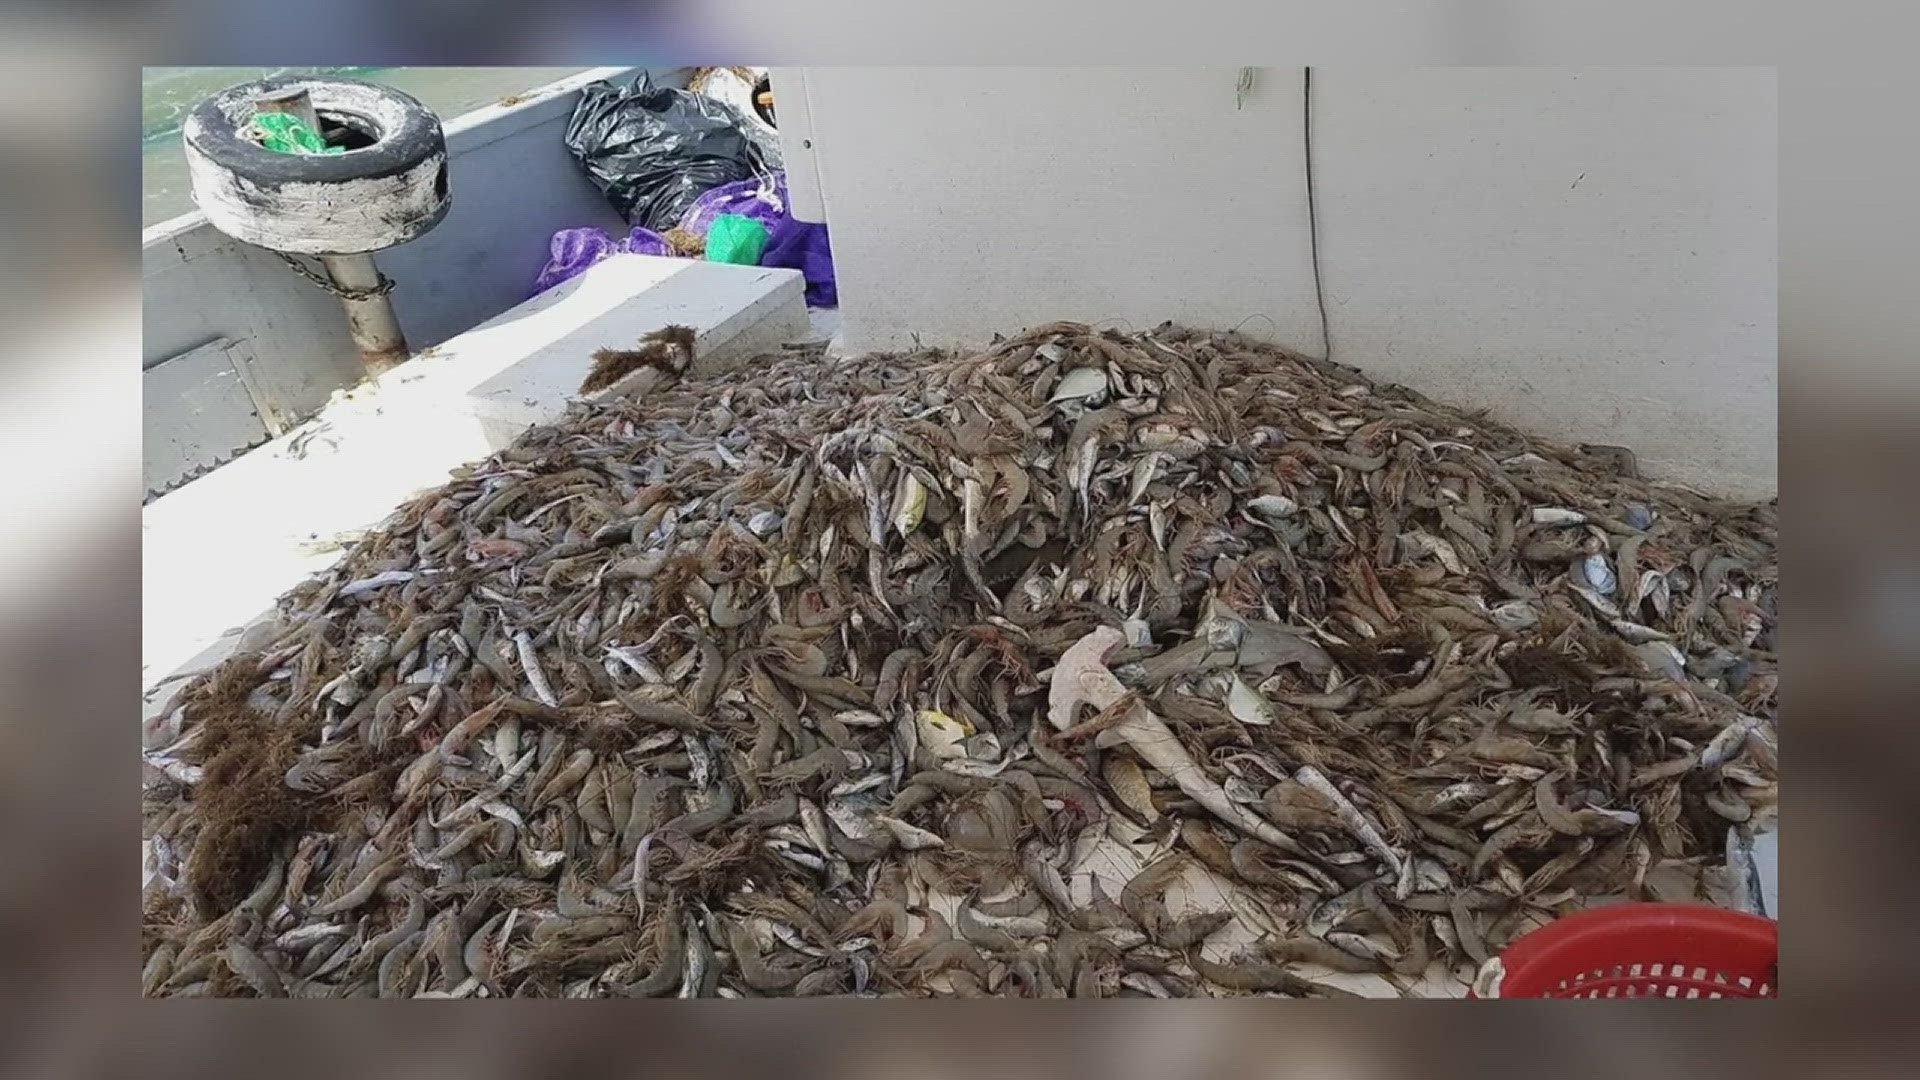 The investigation was initiated based on support from both shrimp processors and shrimp boats according to the ASPA.